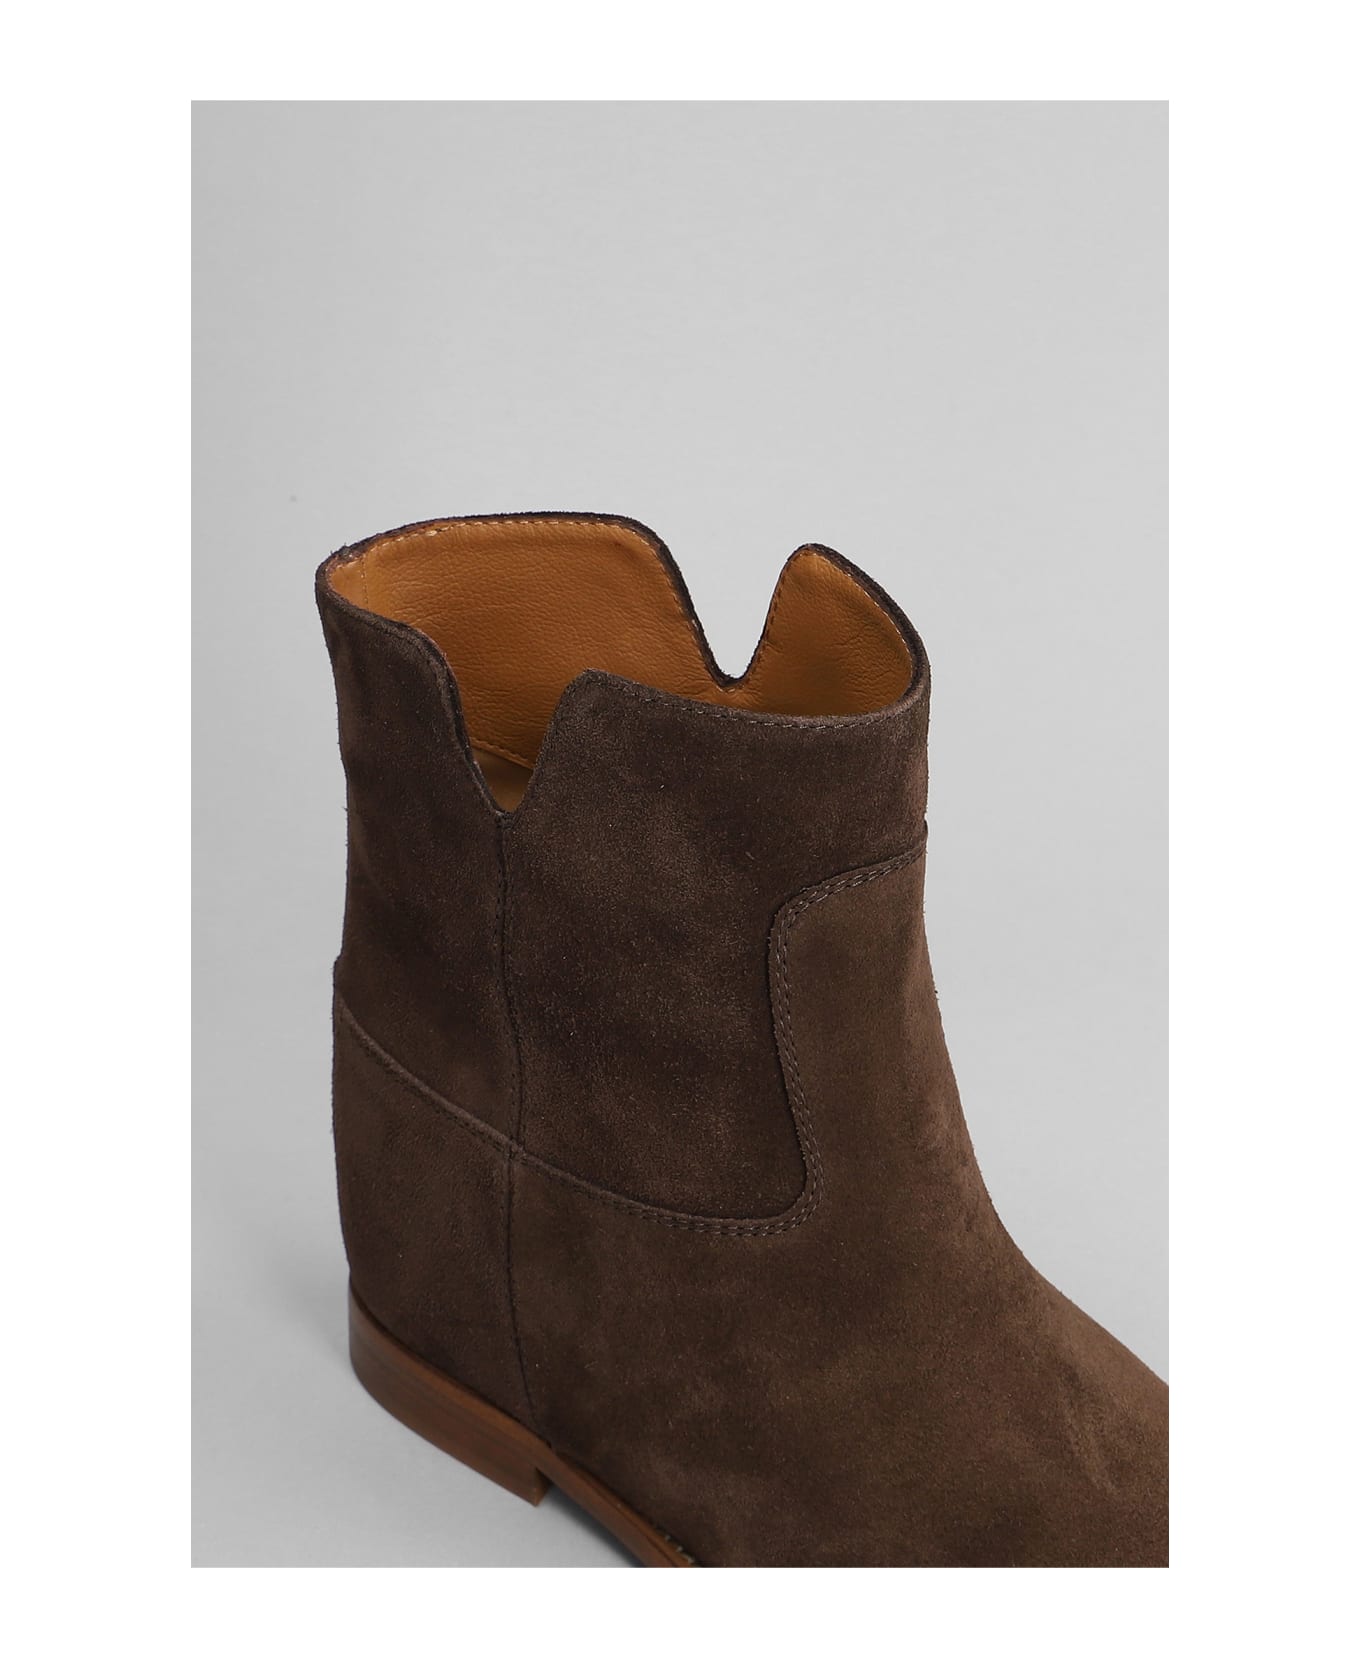 Via Roma 15 Ankle Boots Inside Wedge In Brown Suede - brown